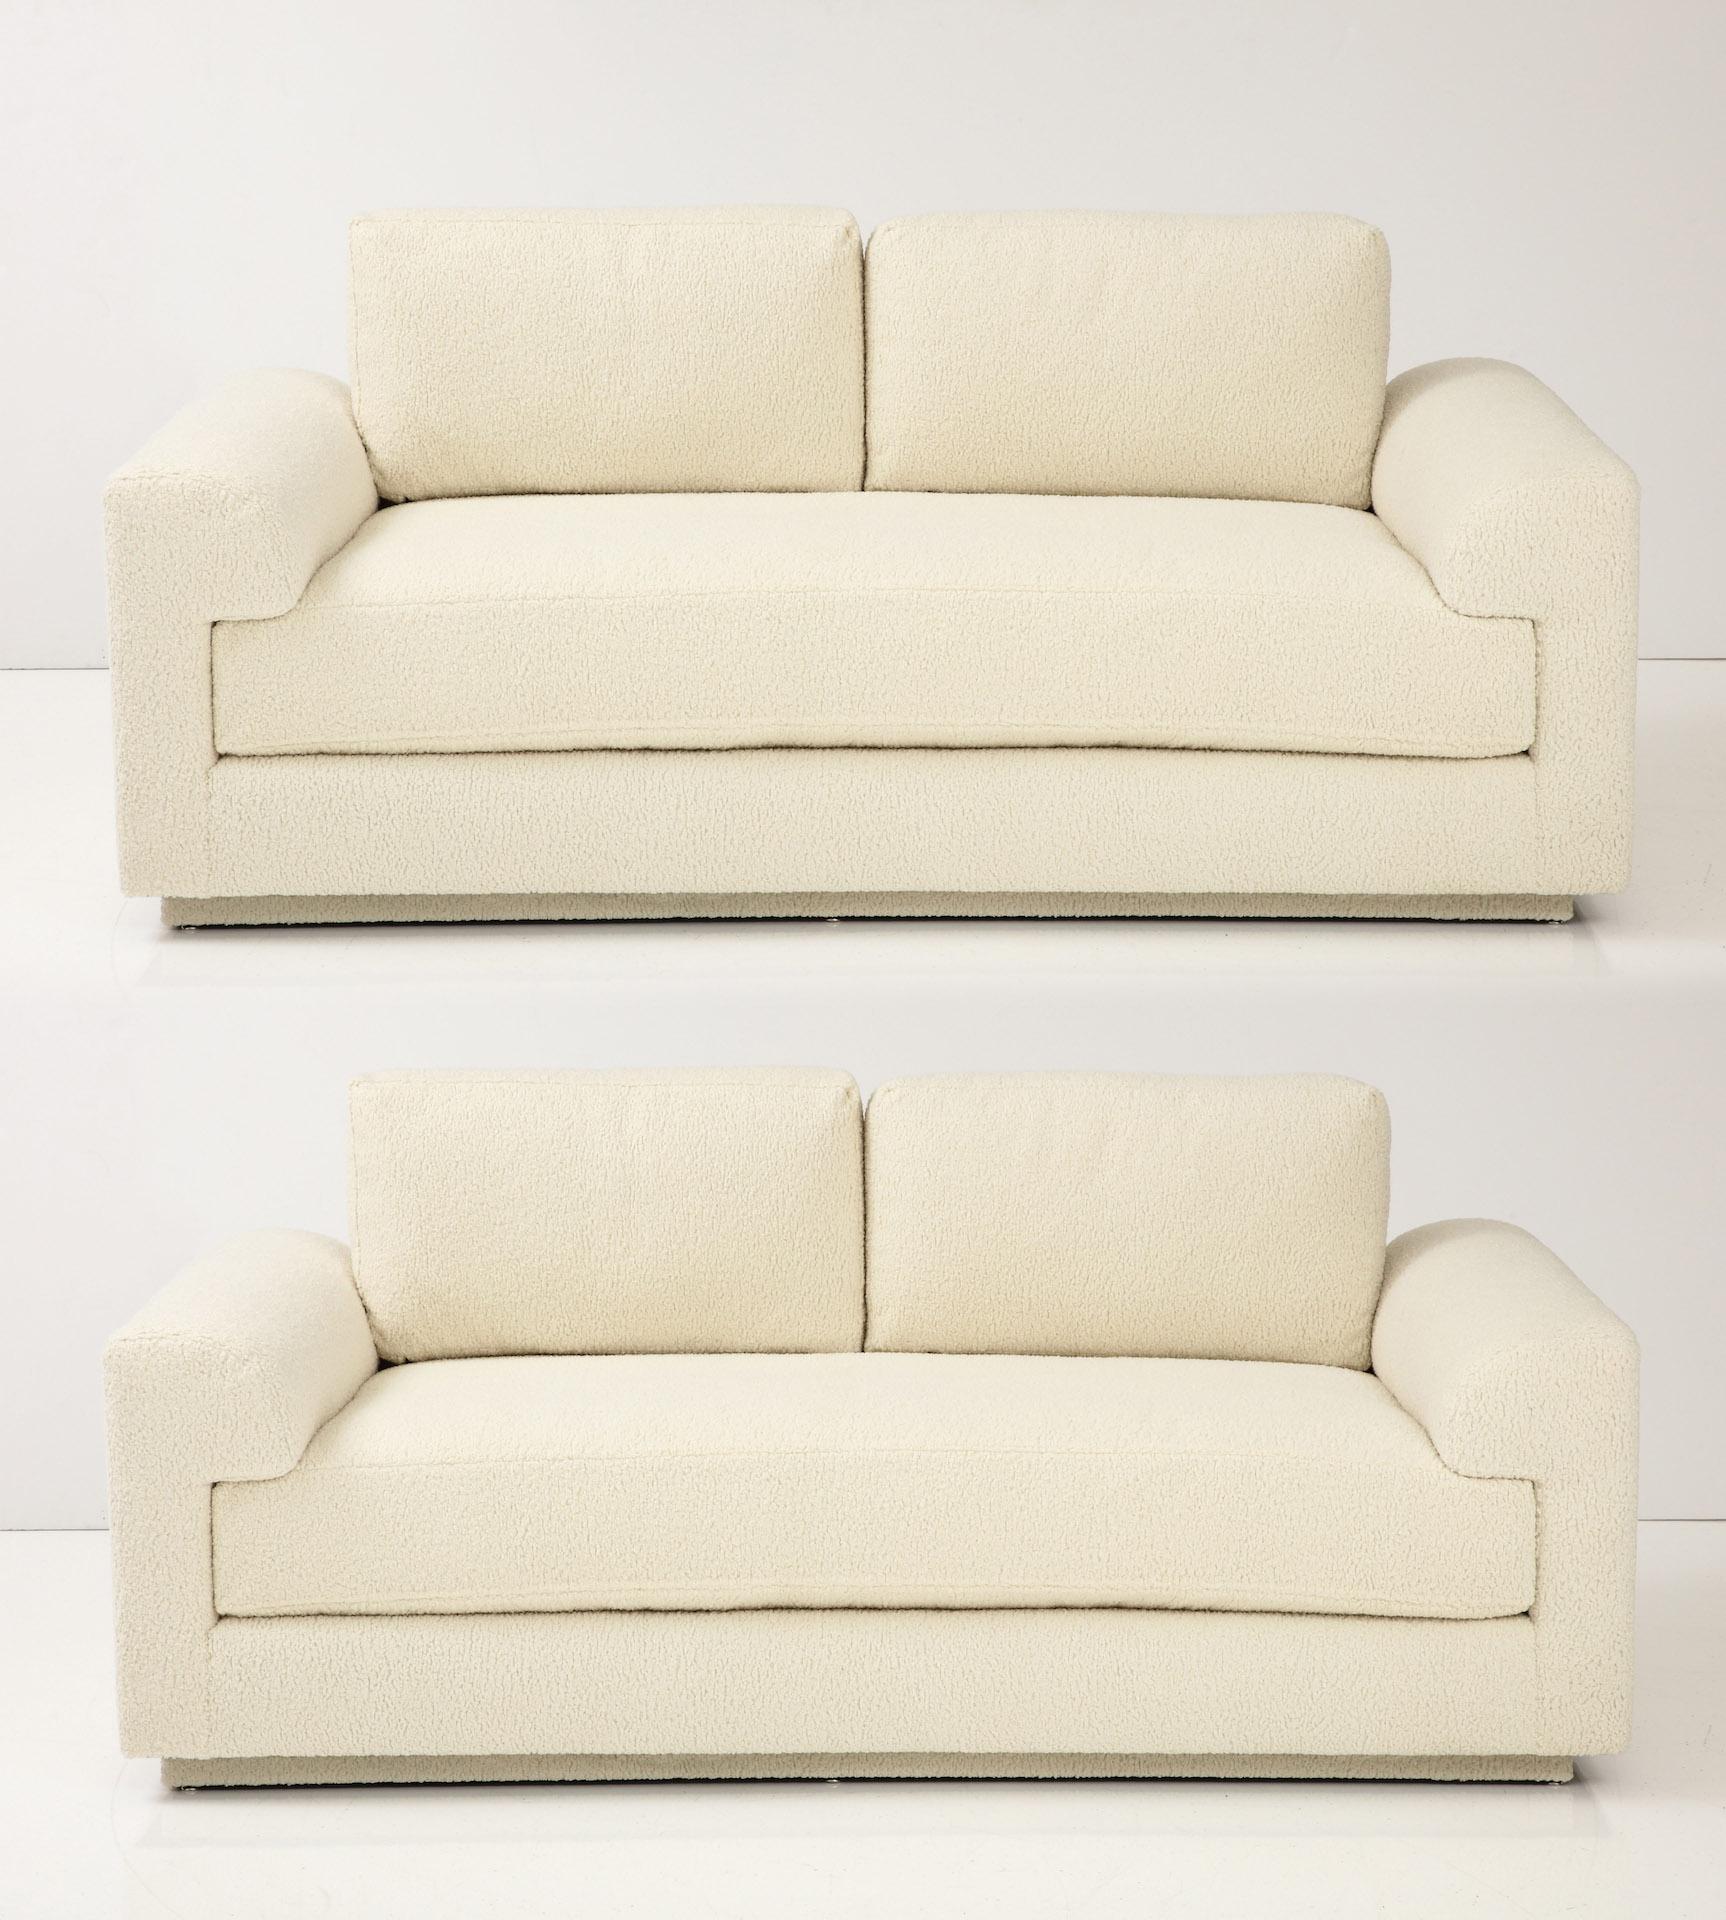 Modernist sofa designed by Larry Laslo for Directional featuring new Italian Ivory Boucle fabric. Back and seat feature cushions which are foam wrapped down and are extremely comfortable yet supportive. 2 throw pillows included. Currently 2 sofas